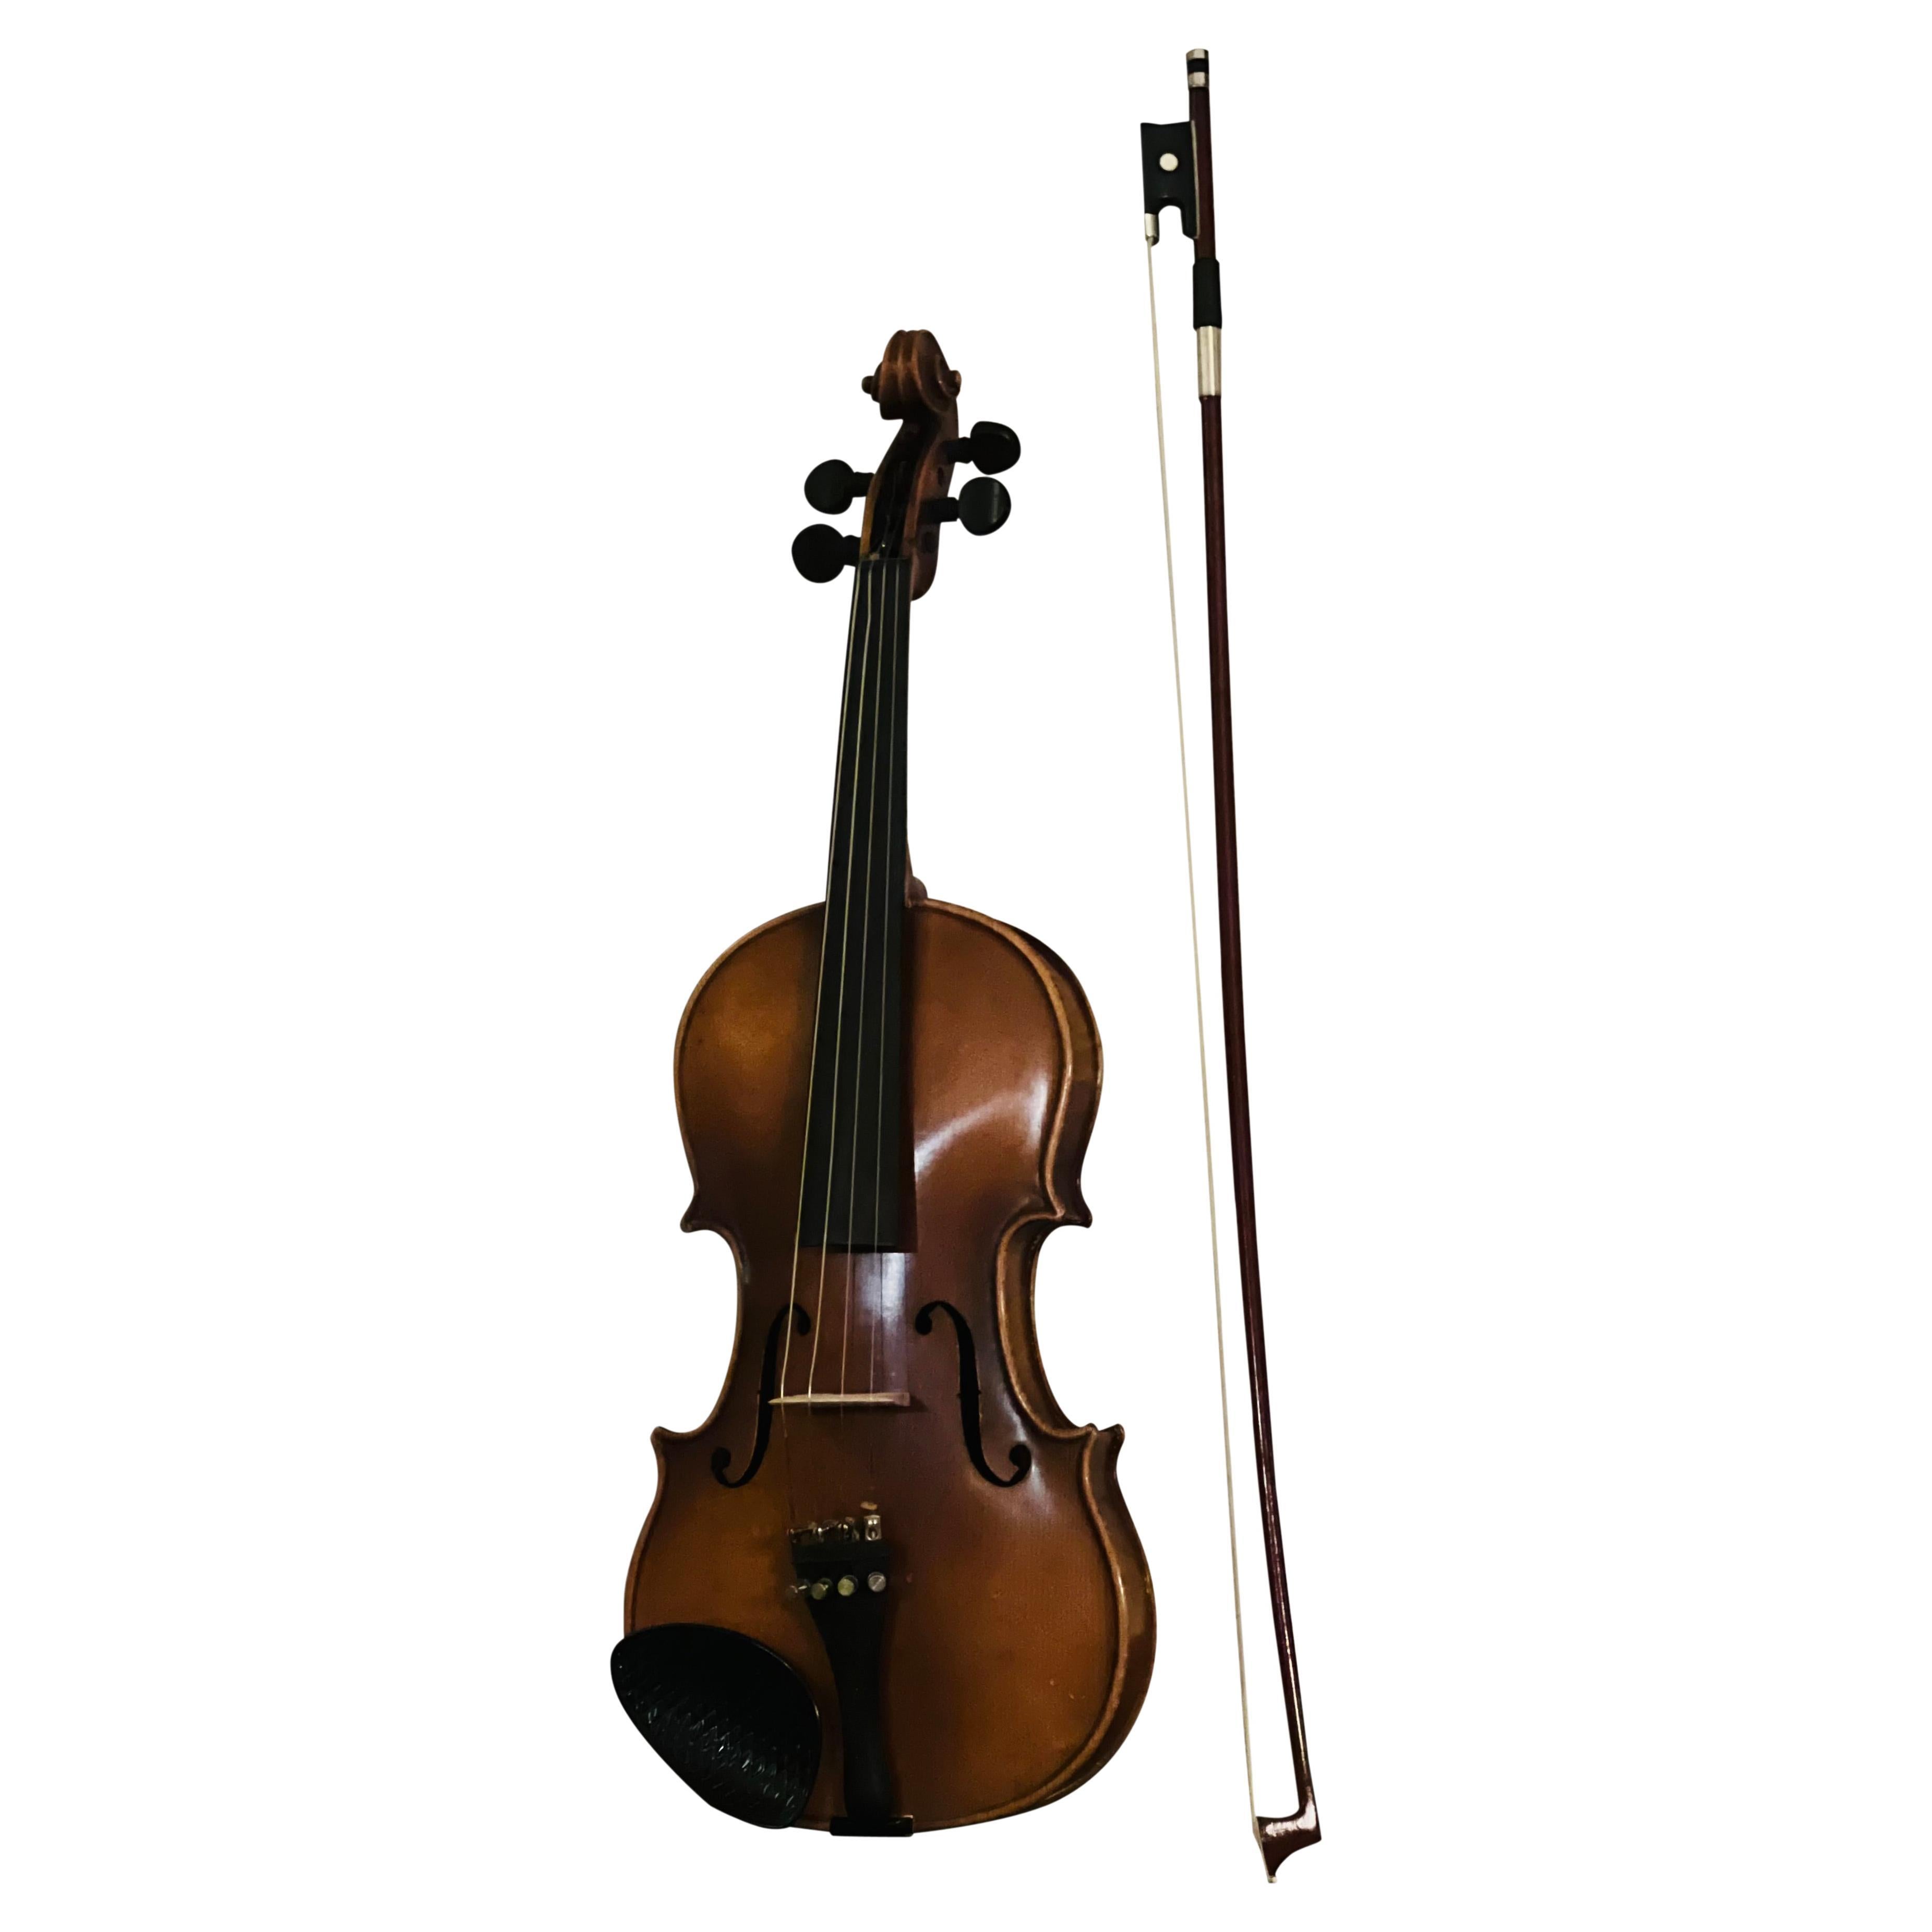 1970 3/4 E.R. Pfretzschner Hand-Crafted Violin in the Style of A. Stradivarius